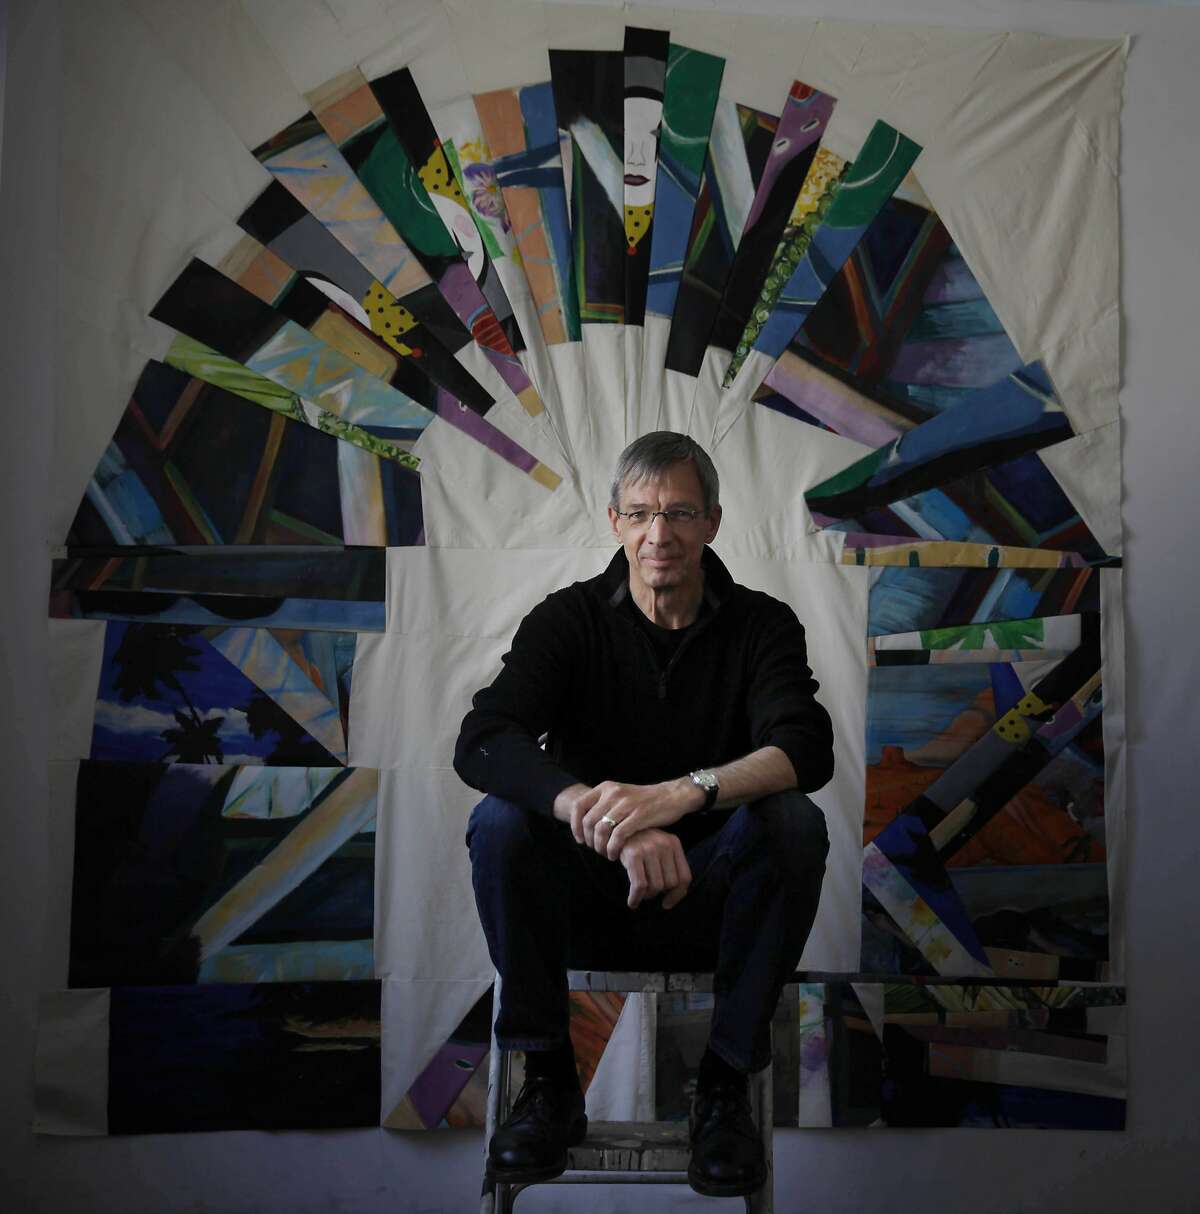 Joe Cunningham, a quilter, poses for a portrait with one of his quilt's "The Imperial Arch of Harriet Powers", a work in progress, made with pieces of paintings on canvas in his studio on Friday, April 18, 2014 in San Francisco, Calif.